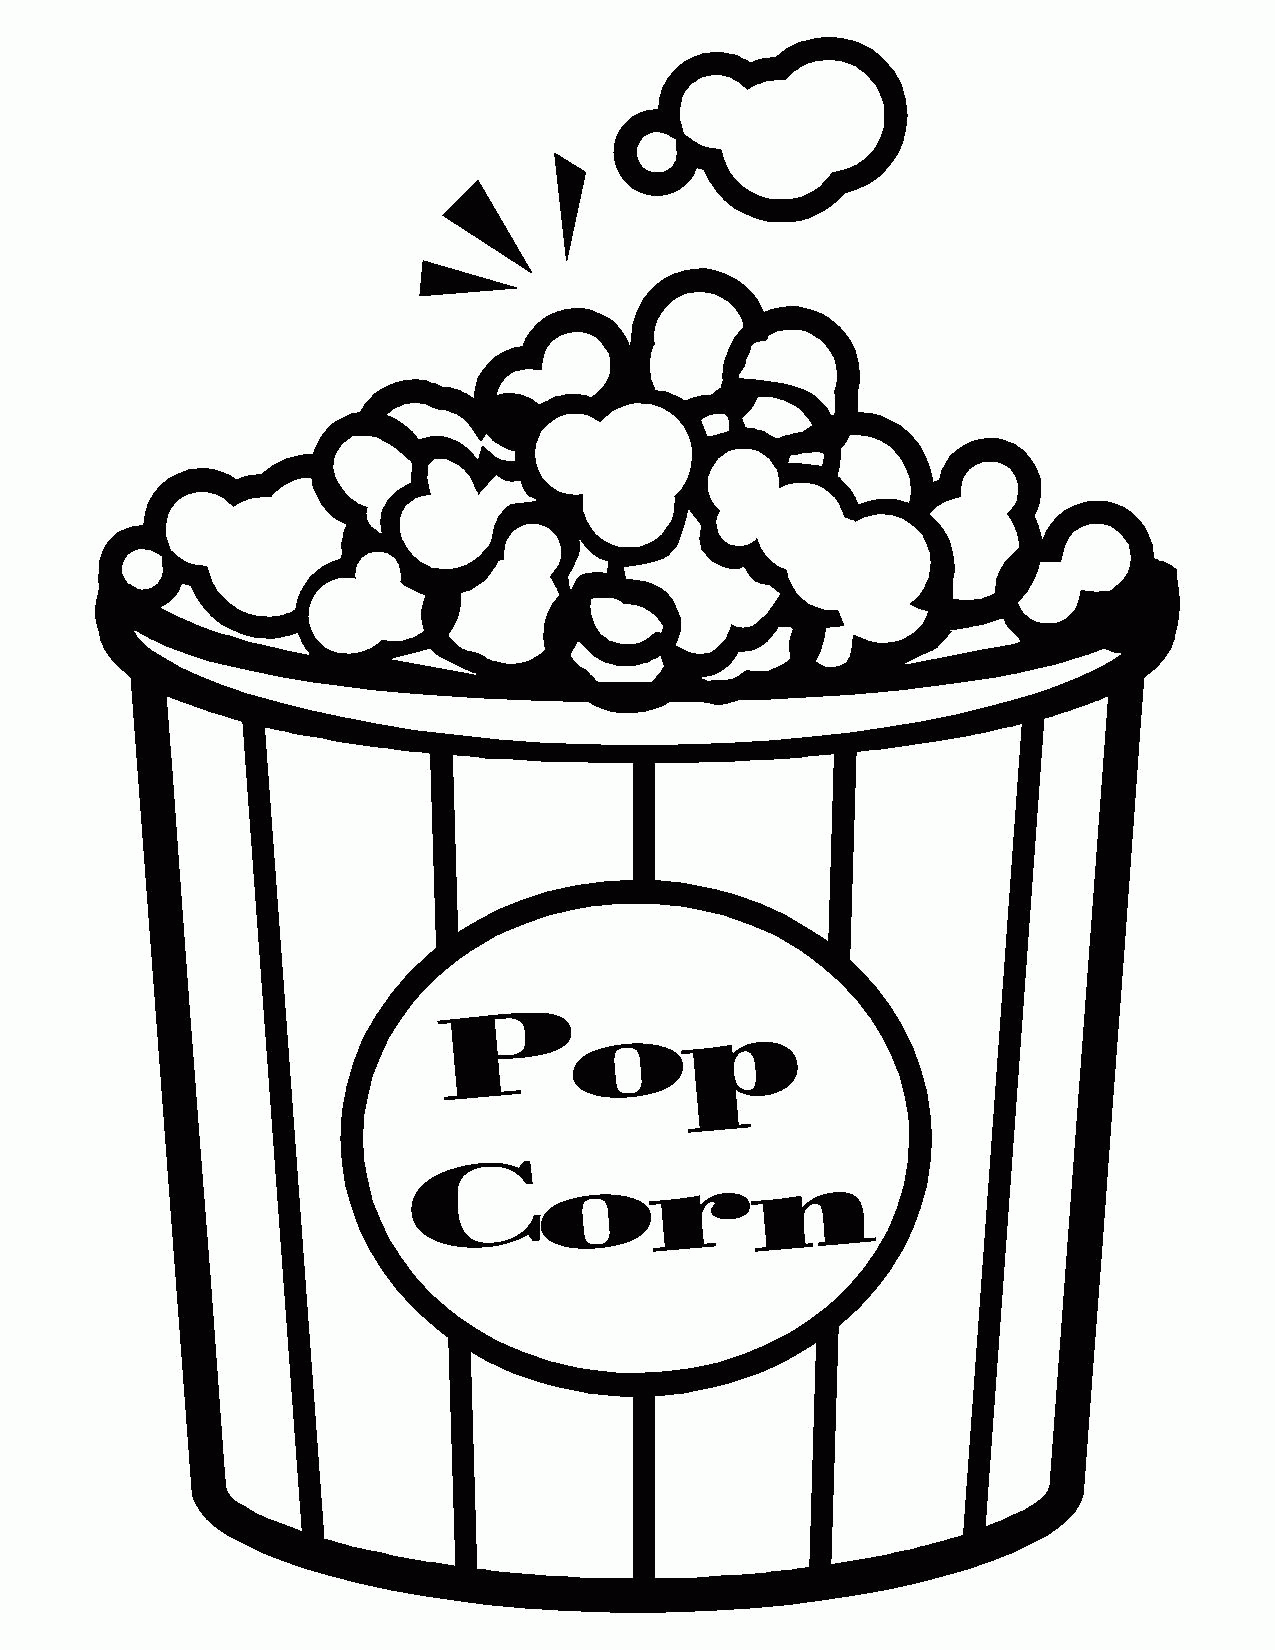 624 Unicorn Free Printable Popcorn Coloring Pages for Kindergarten